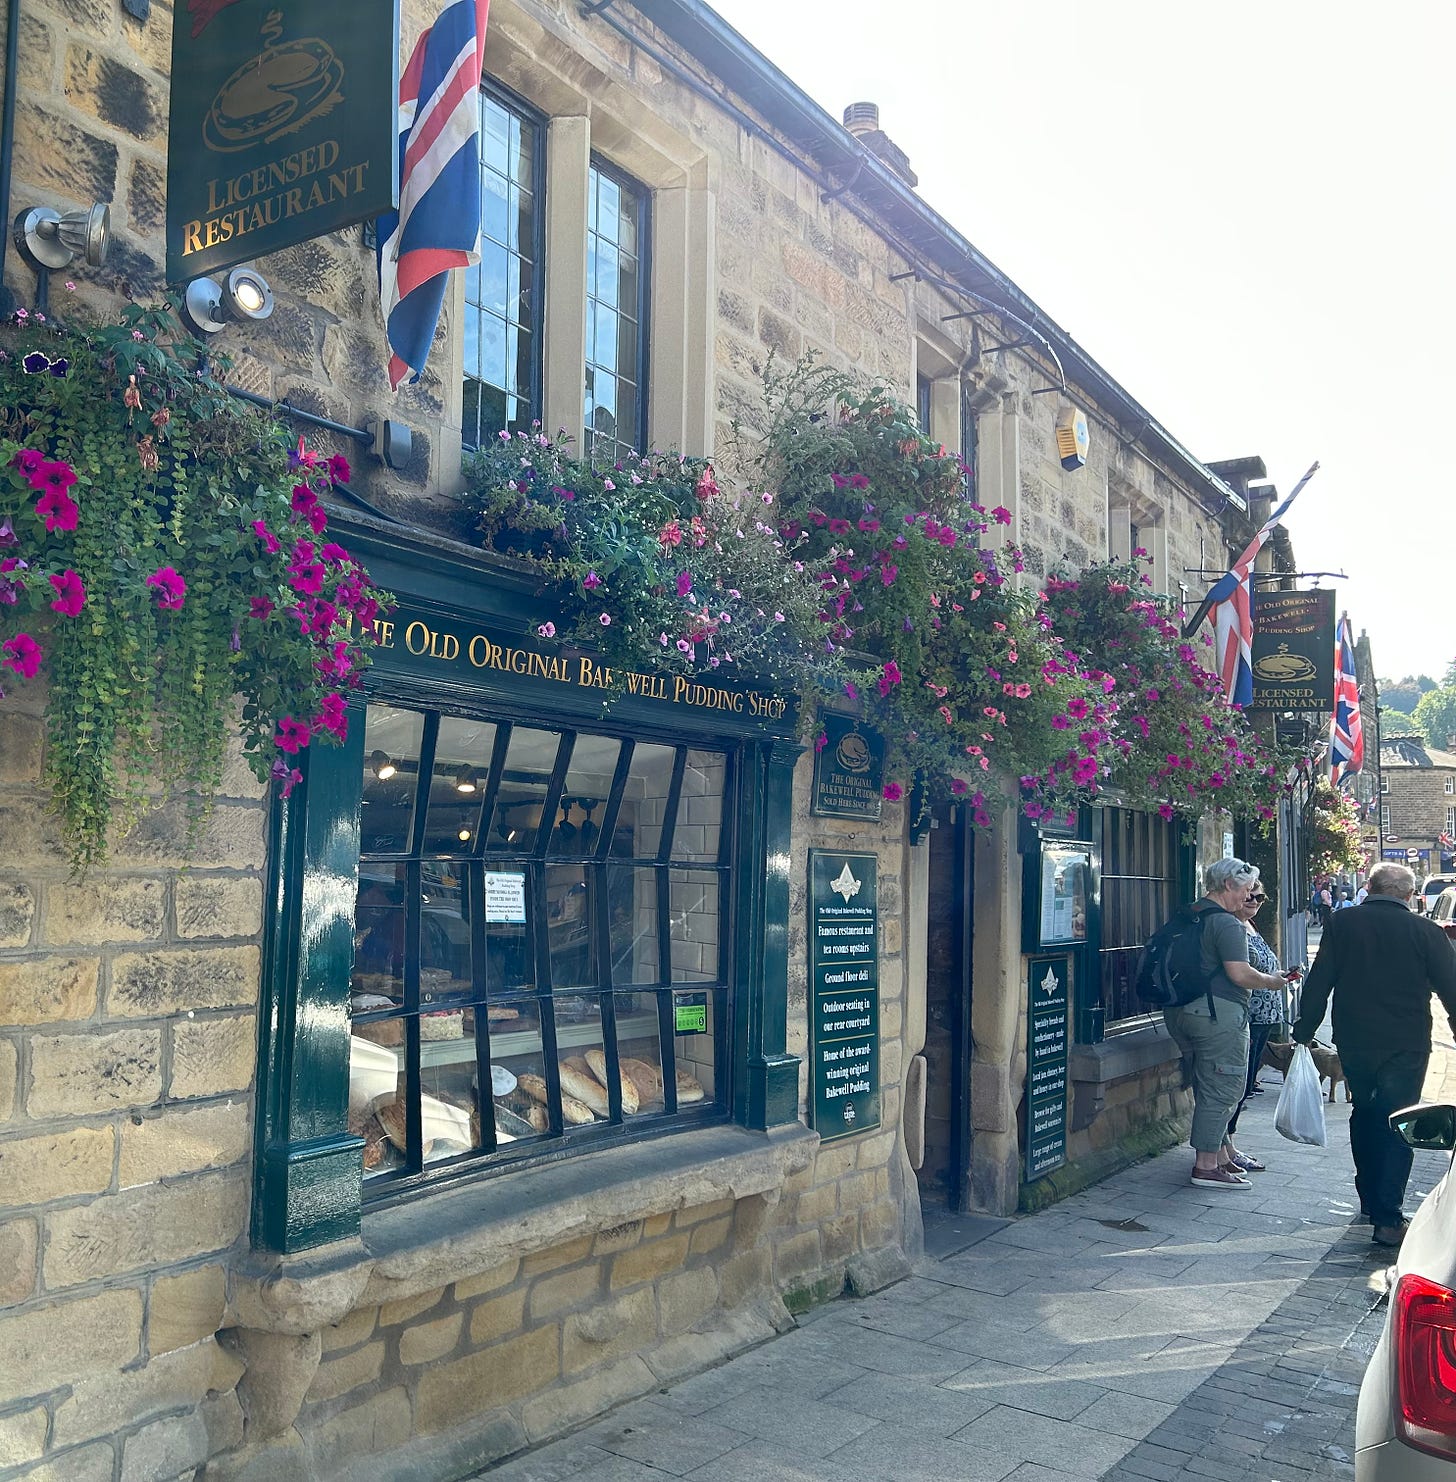 A shop. This is the Old Original Bakewell Pudding Shop, Bakewell, Derbyshire. The shop has a fine display of flowers hanging over the door and windows. Image: Roland's Travels